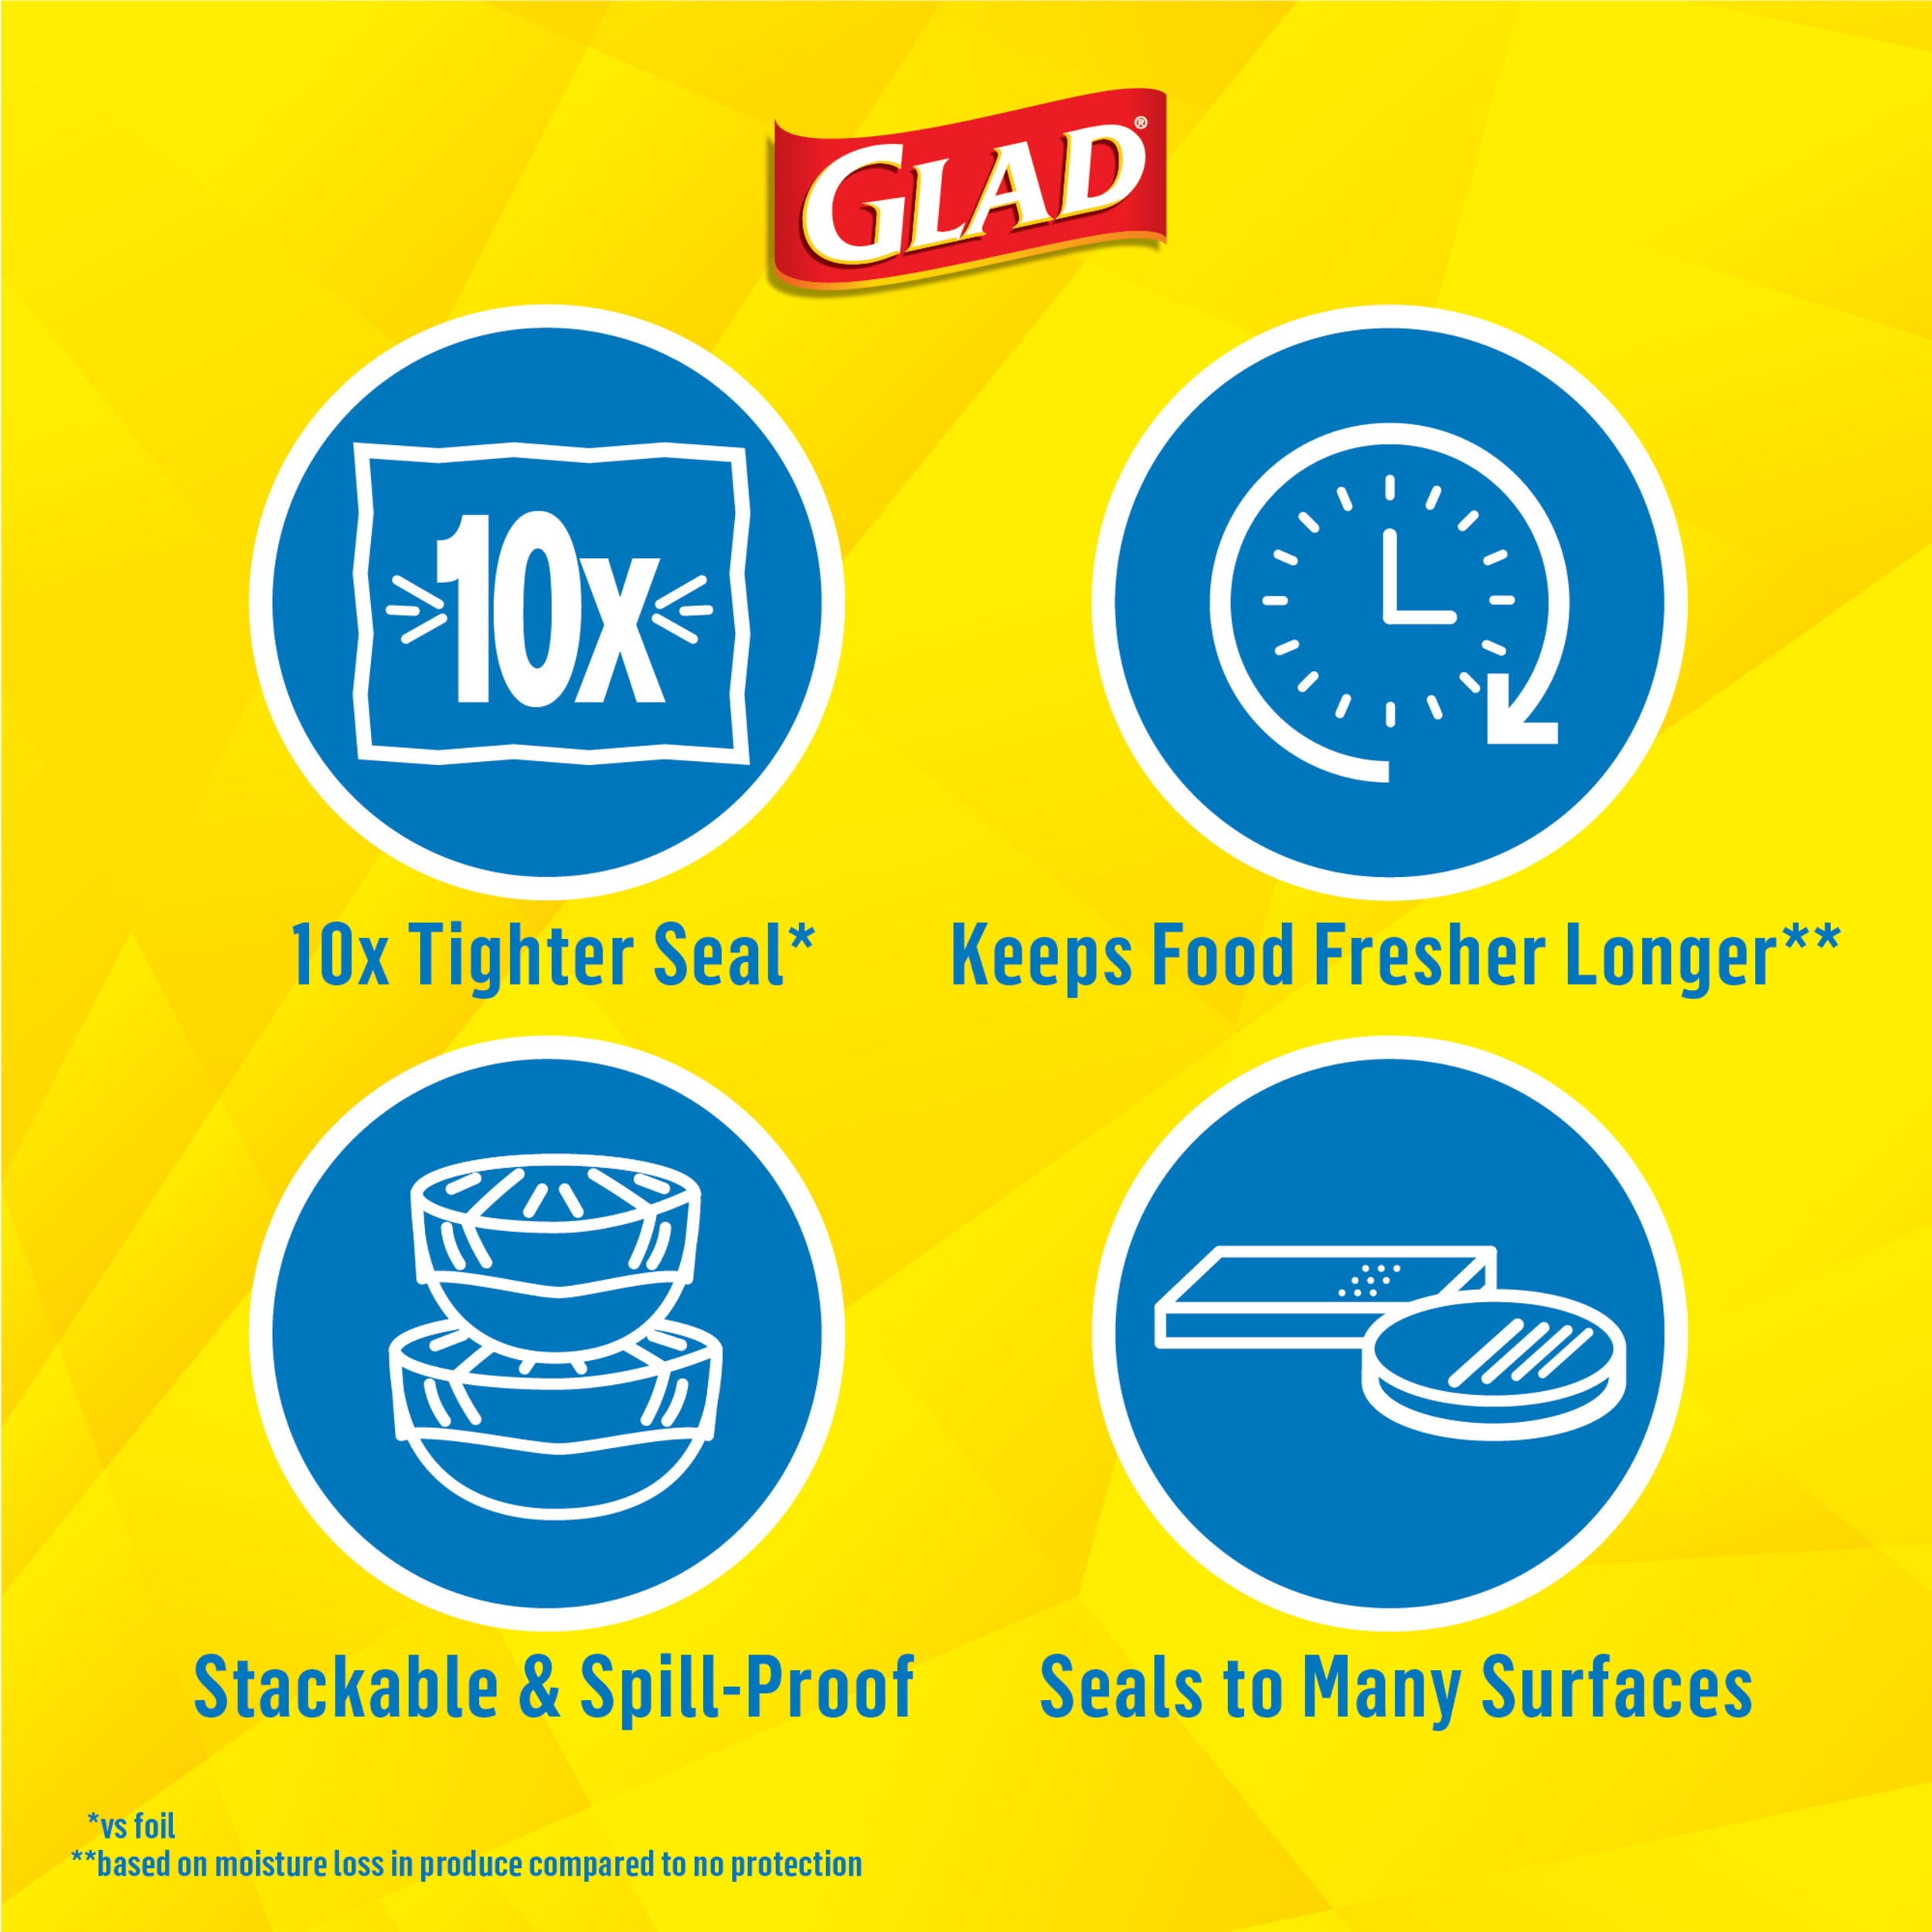 Glad Press 'n Seal Sealable Plastic Wrap - 70 sq ft roll